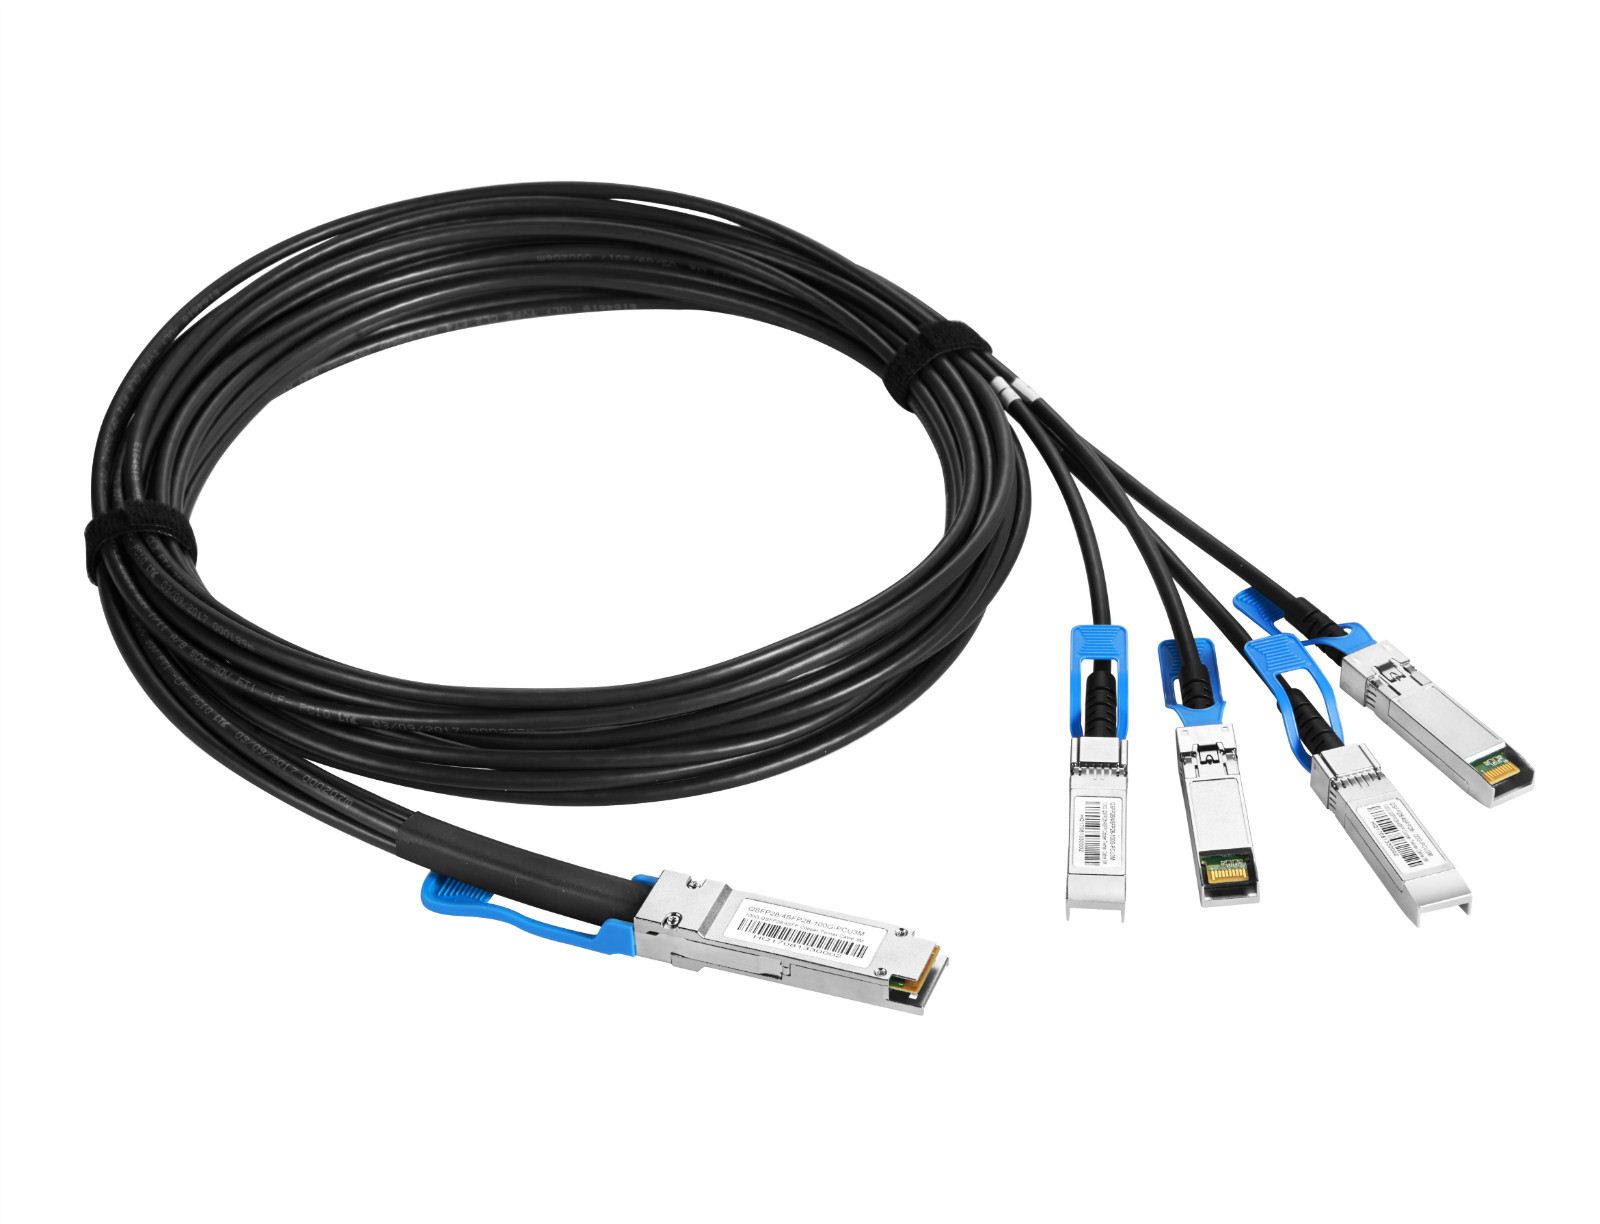 Outstanding SFP28 DAC Cablesprovides first-class service